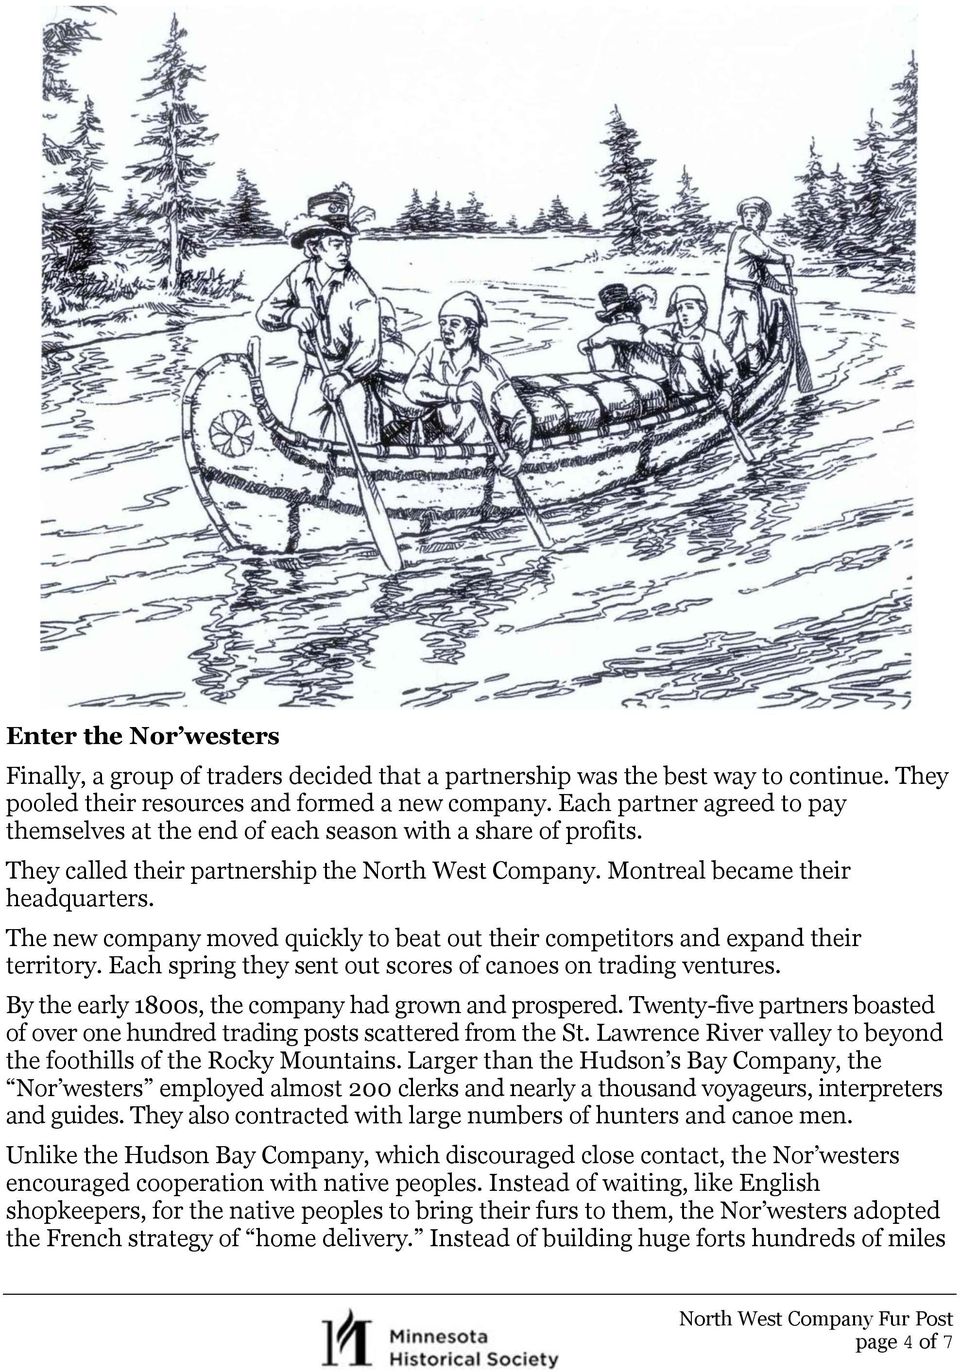 The new company moved quickly to beat out their competitors and expand their territory. Each spring they sent out scores of canoes on trading ventures.